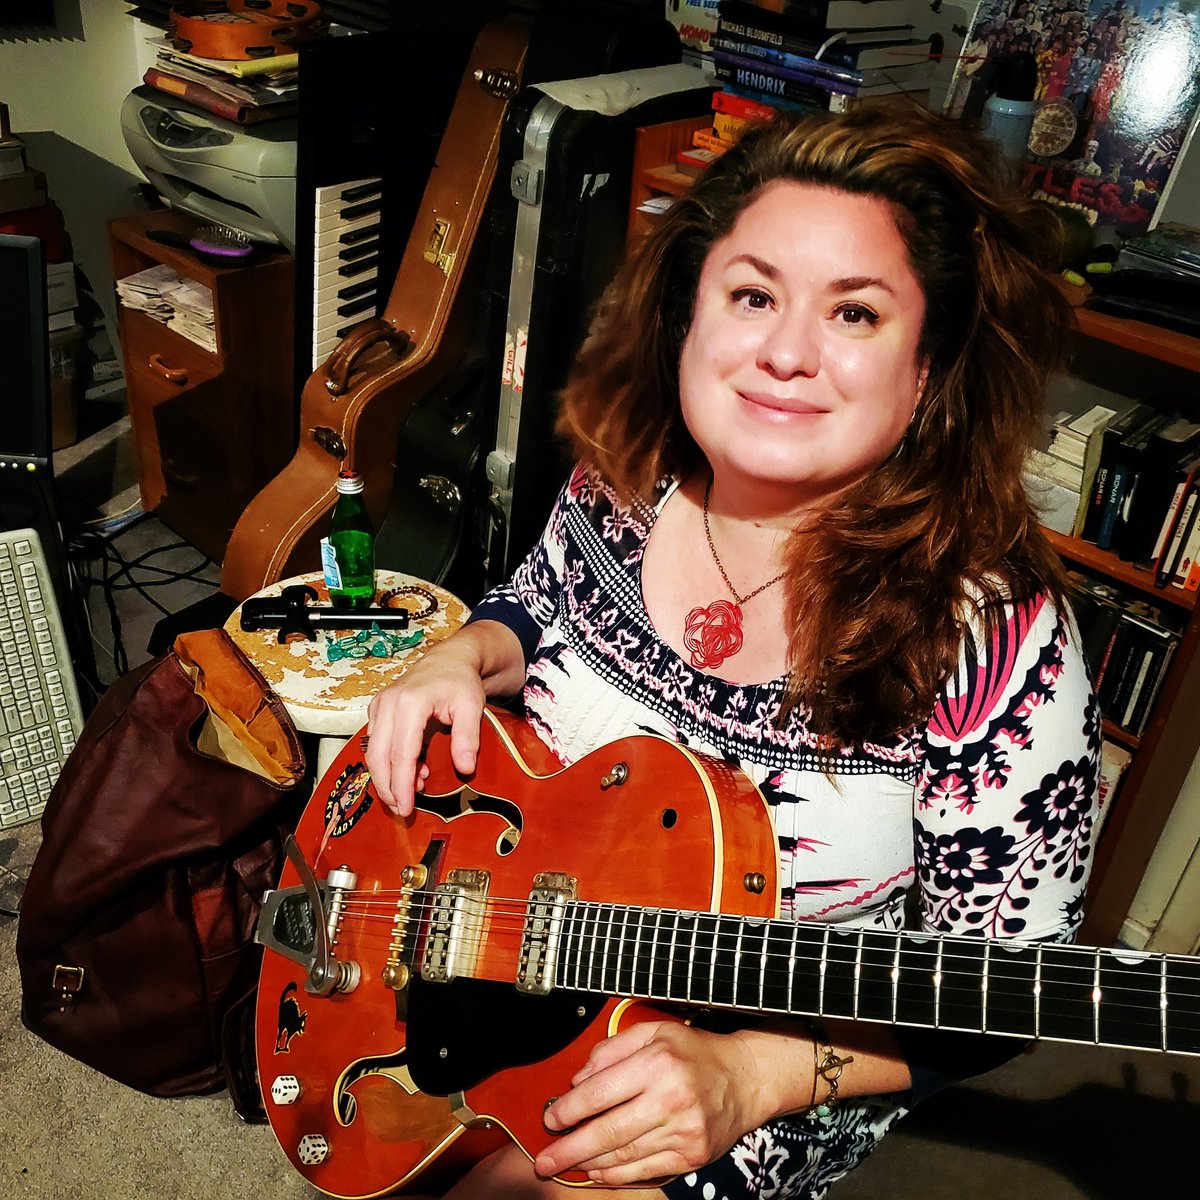 Recording my guitar track for Promises today got my mind focused on creating new songs. focusing so that I can utilize the time well and musically!
#amyzamarripa #singersongwriter #austinartist #texas #music #curlyheadstudio #original #songs #guitar #gretsch #montemann #producer